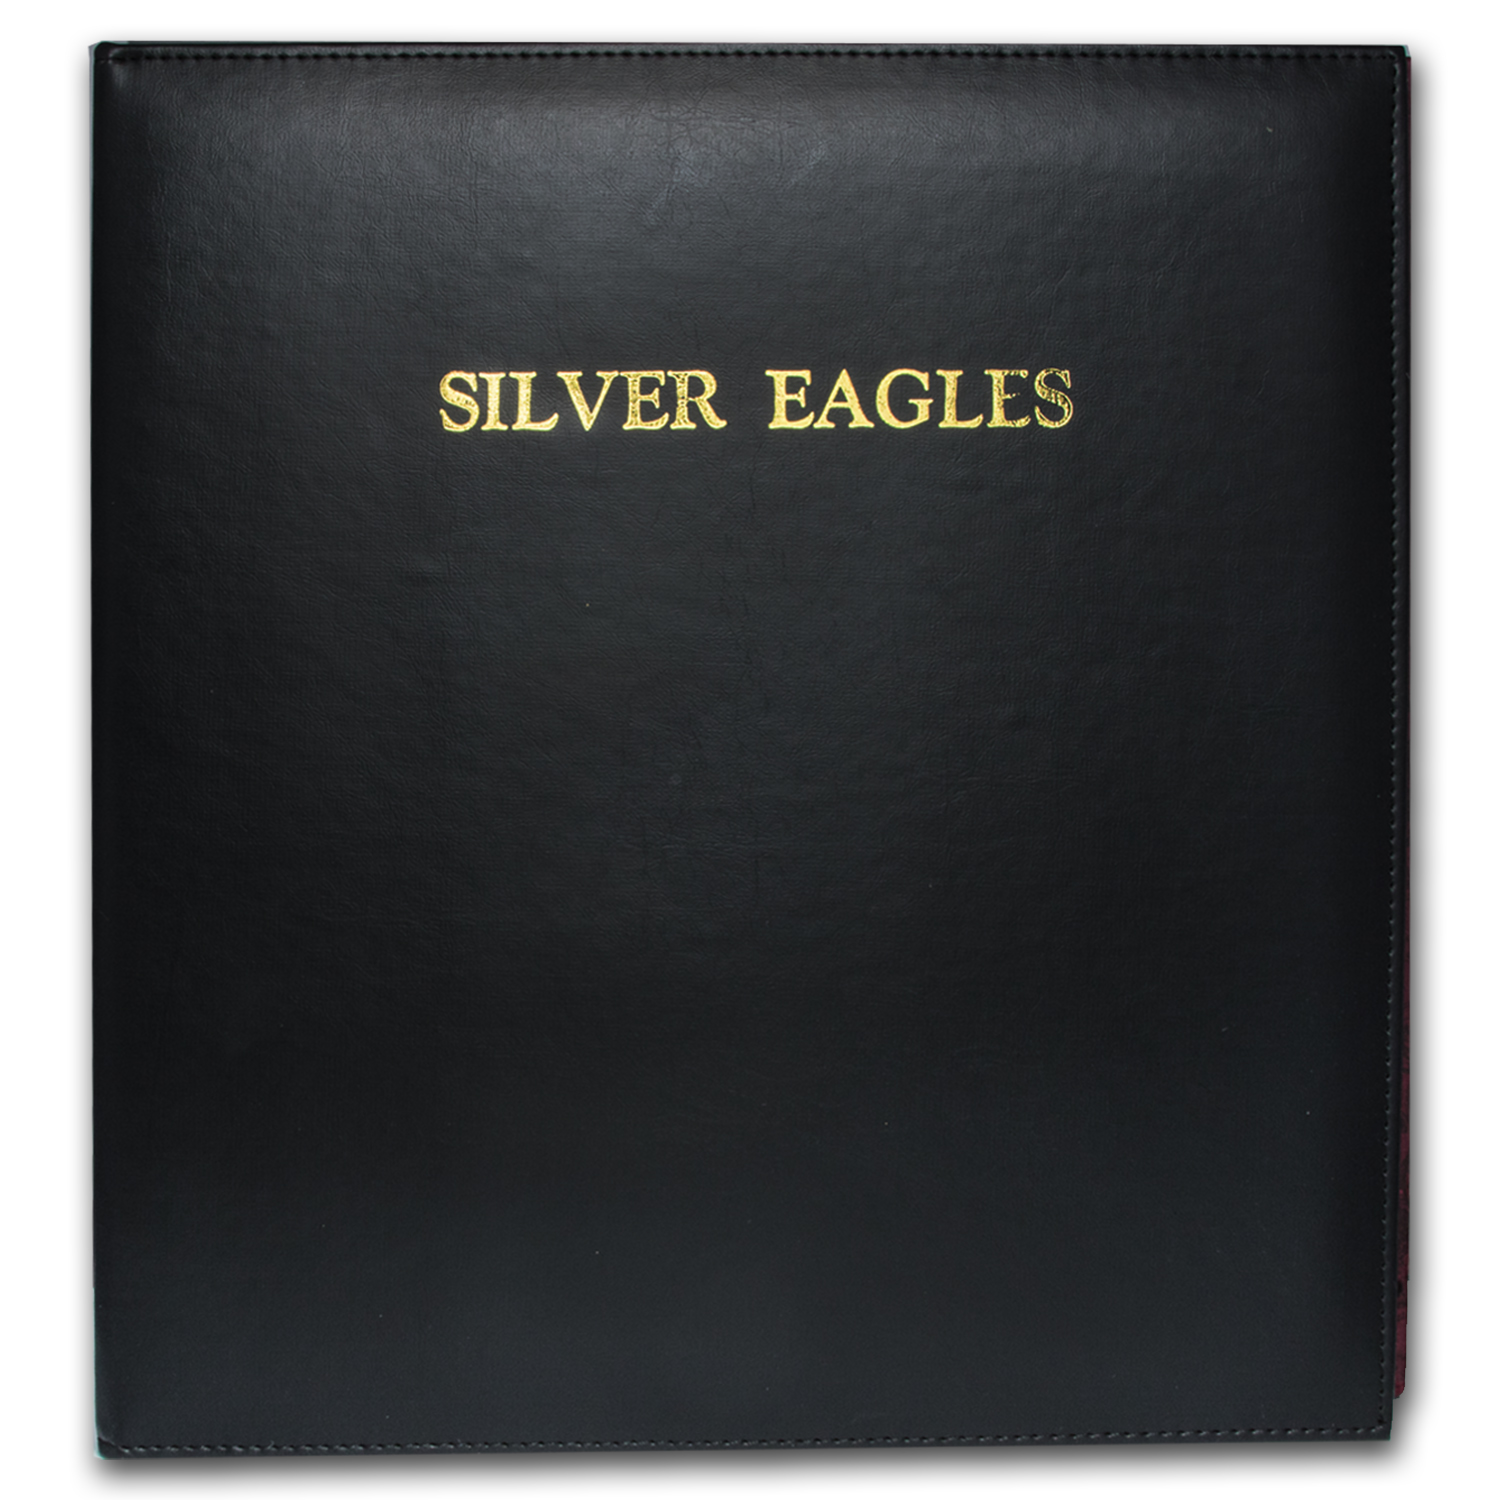 Buy CAPS Album #2225 for Silver Eagle Date Set (1986-Date)